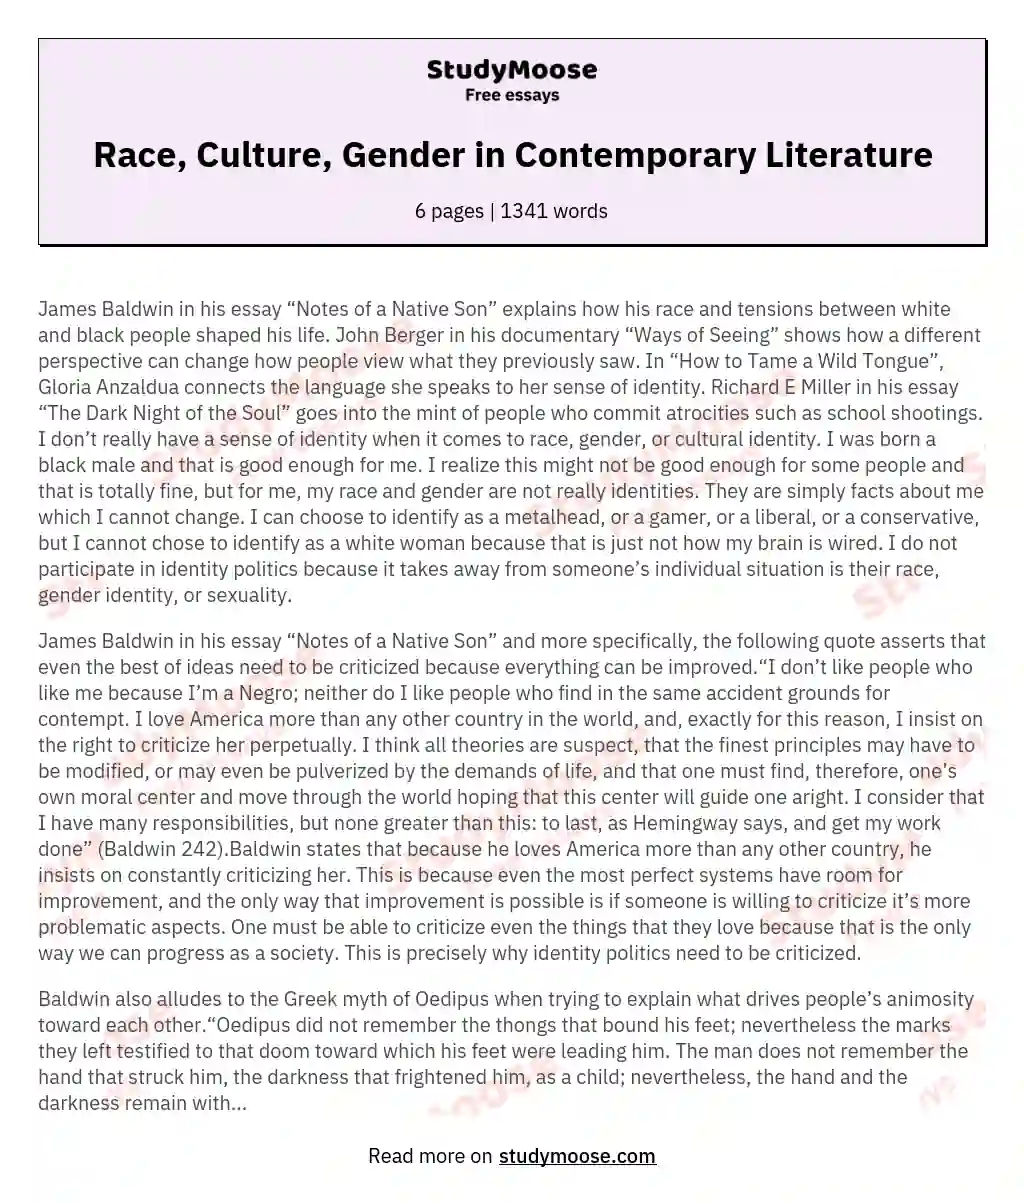 A Study Of The Theme Of Race, Culture, And Gender In Hames Baldwin's Notes Of A Native Son, John Berger's Ways Of Seeing Gloria Anzaldua's How To Tame A Wild Tongue And Richard E. Miller's The Dark Night Of The Soul